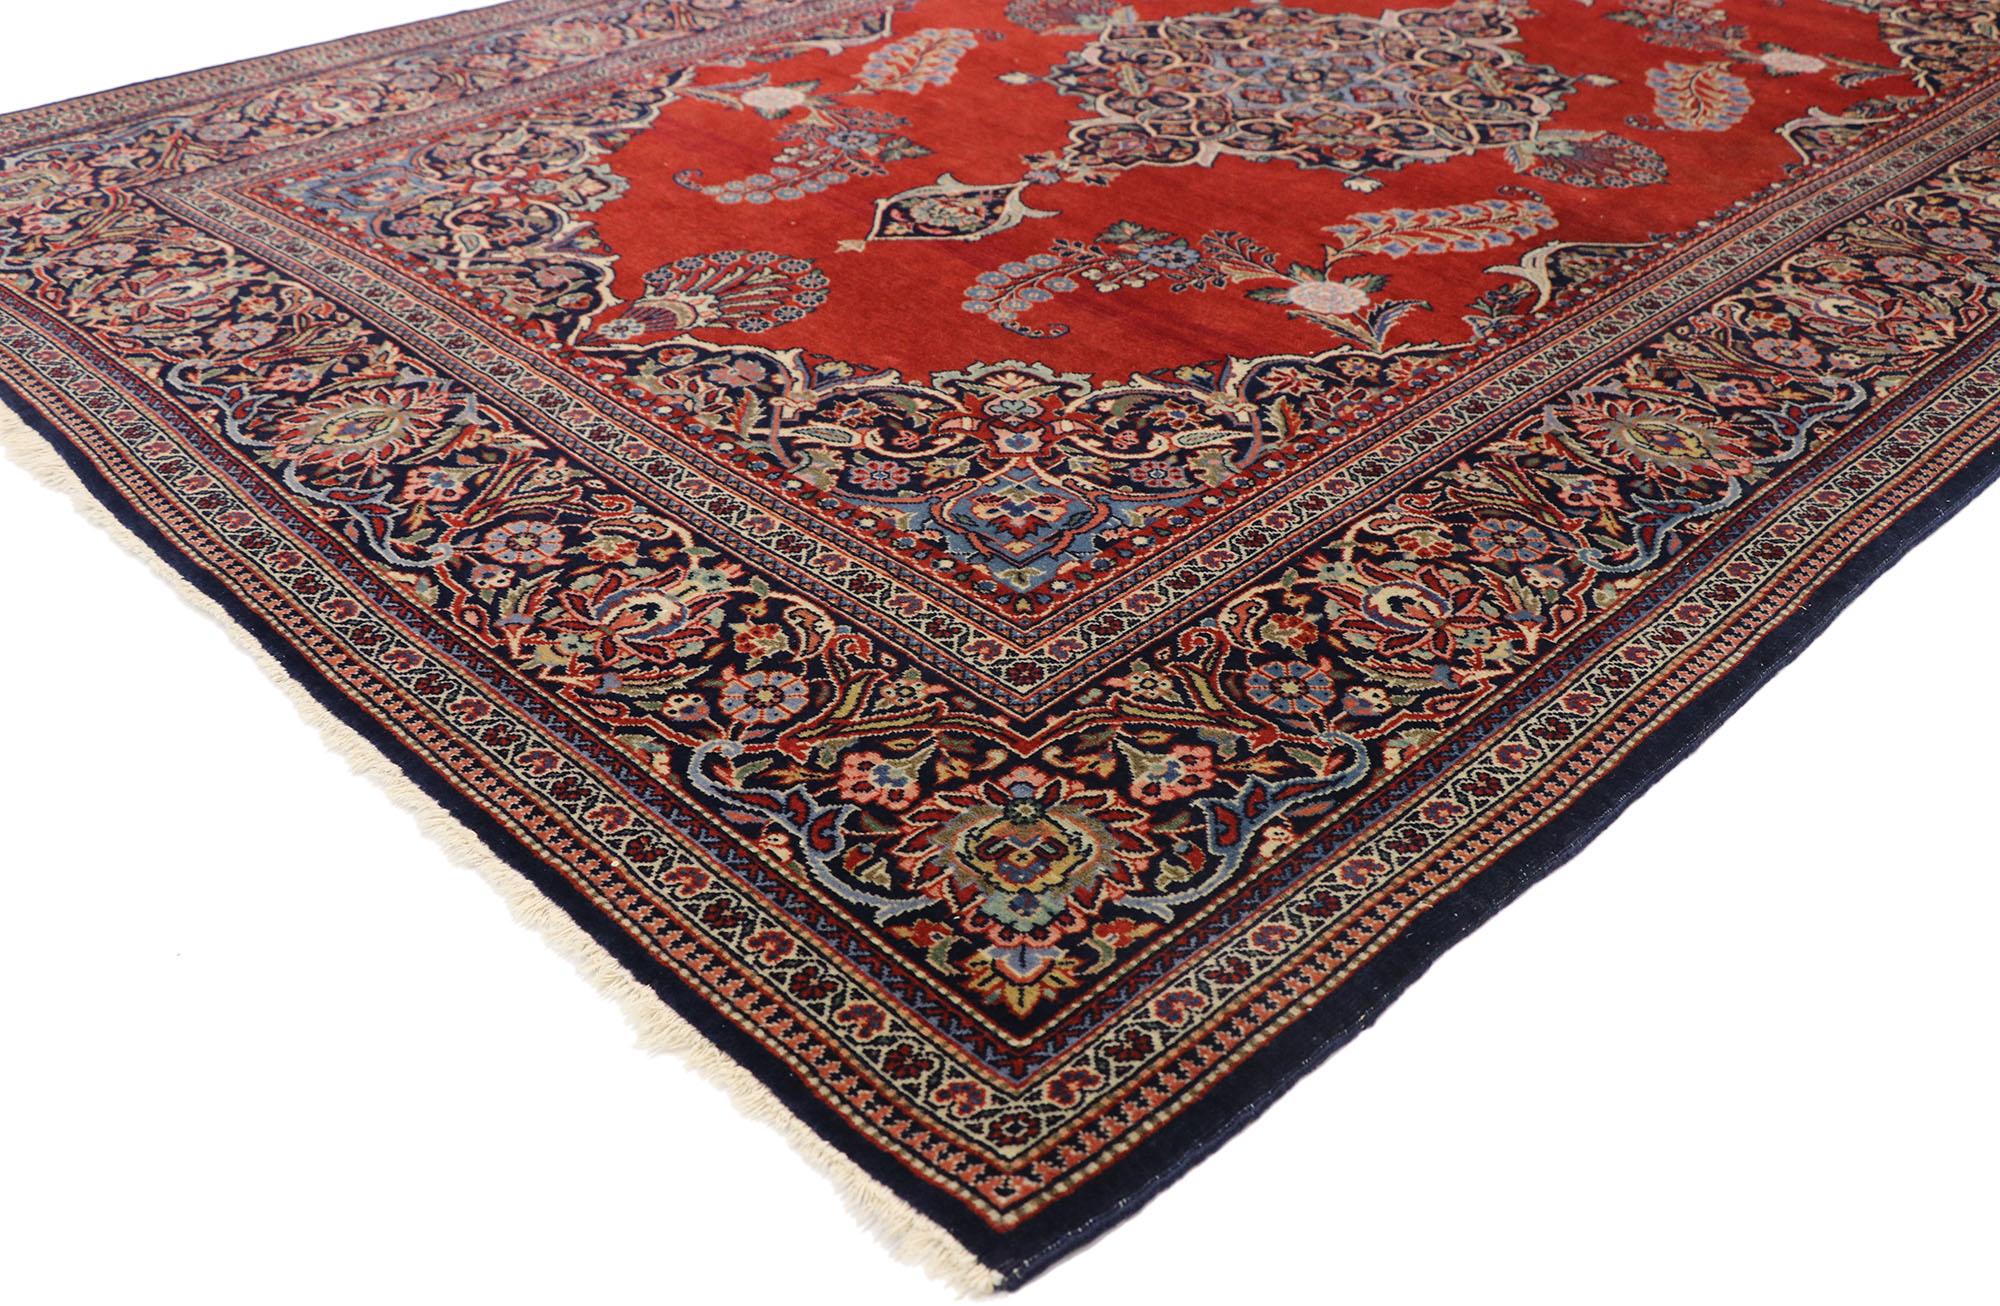 77427 Vintage Persian Kashan Rug with English Jacobean Style. With its striking appeal and saturated color palette, this hand-knotted wool vintage Persian Kashan rug appears like a sumptuous Italian velvet, recalling the rich and luxurious design